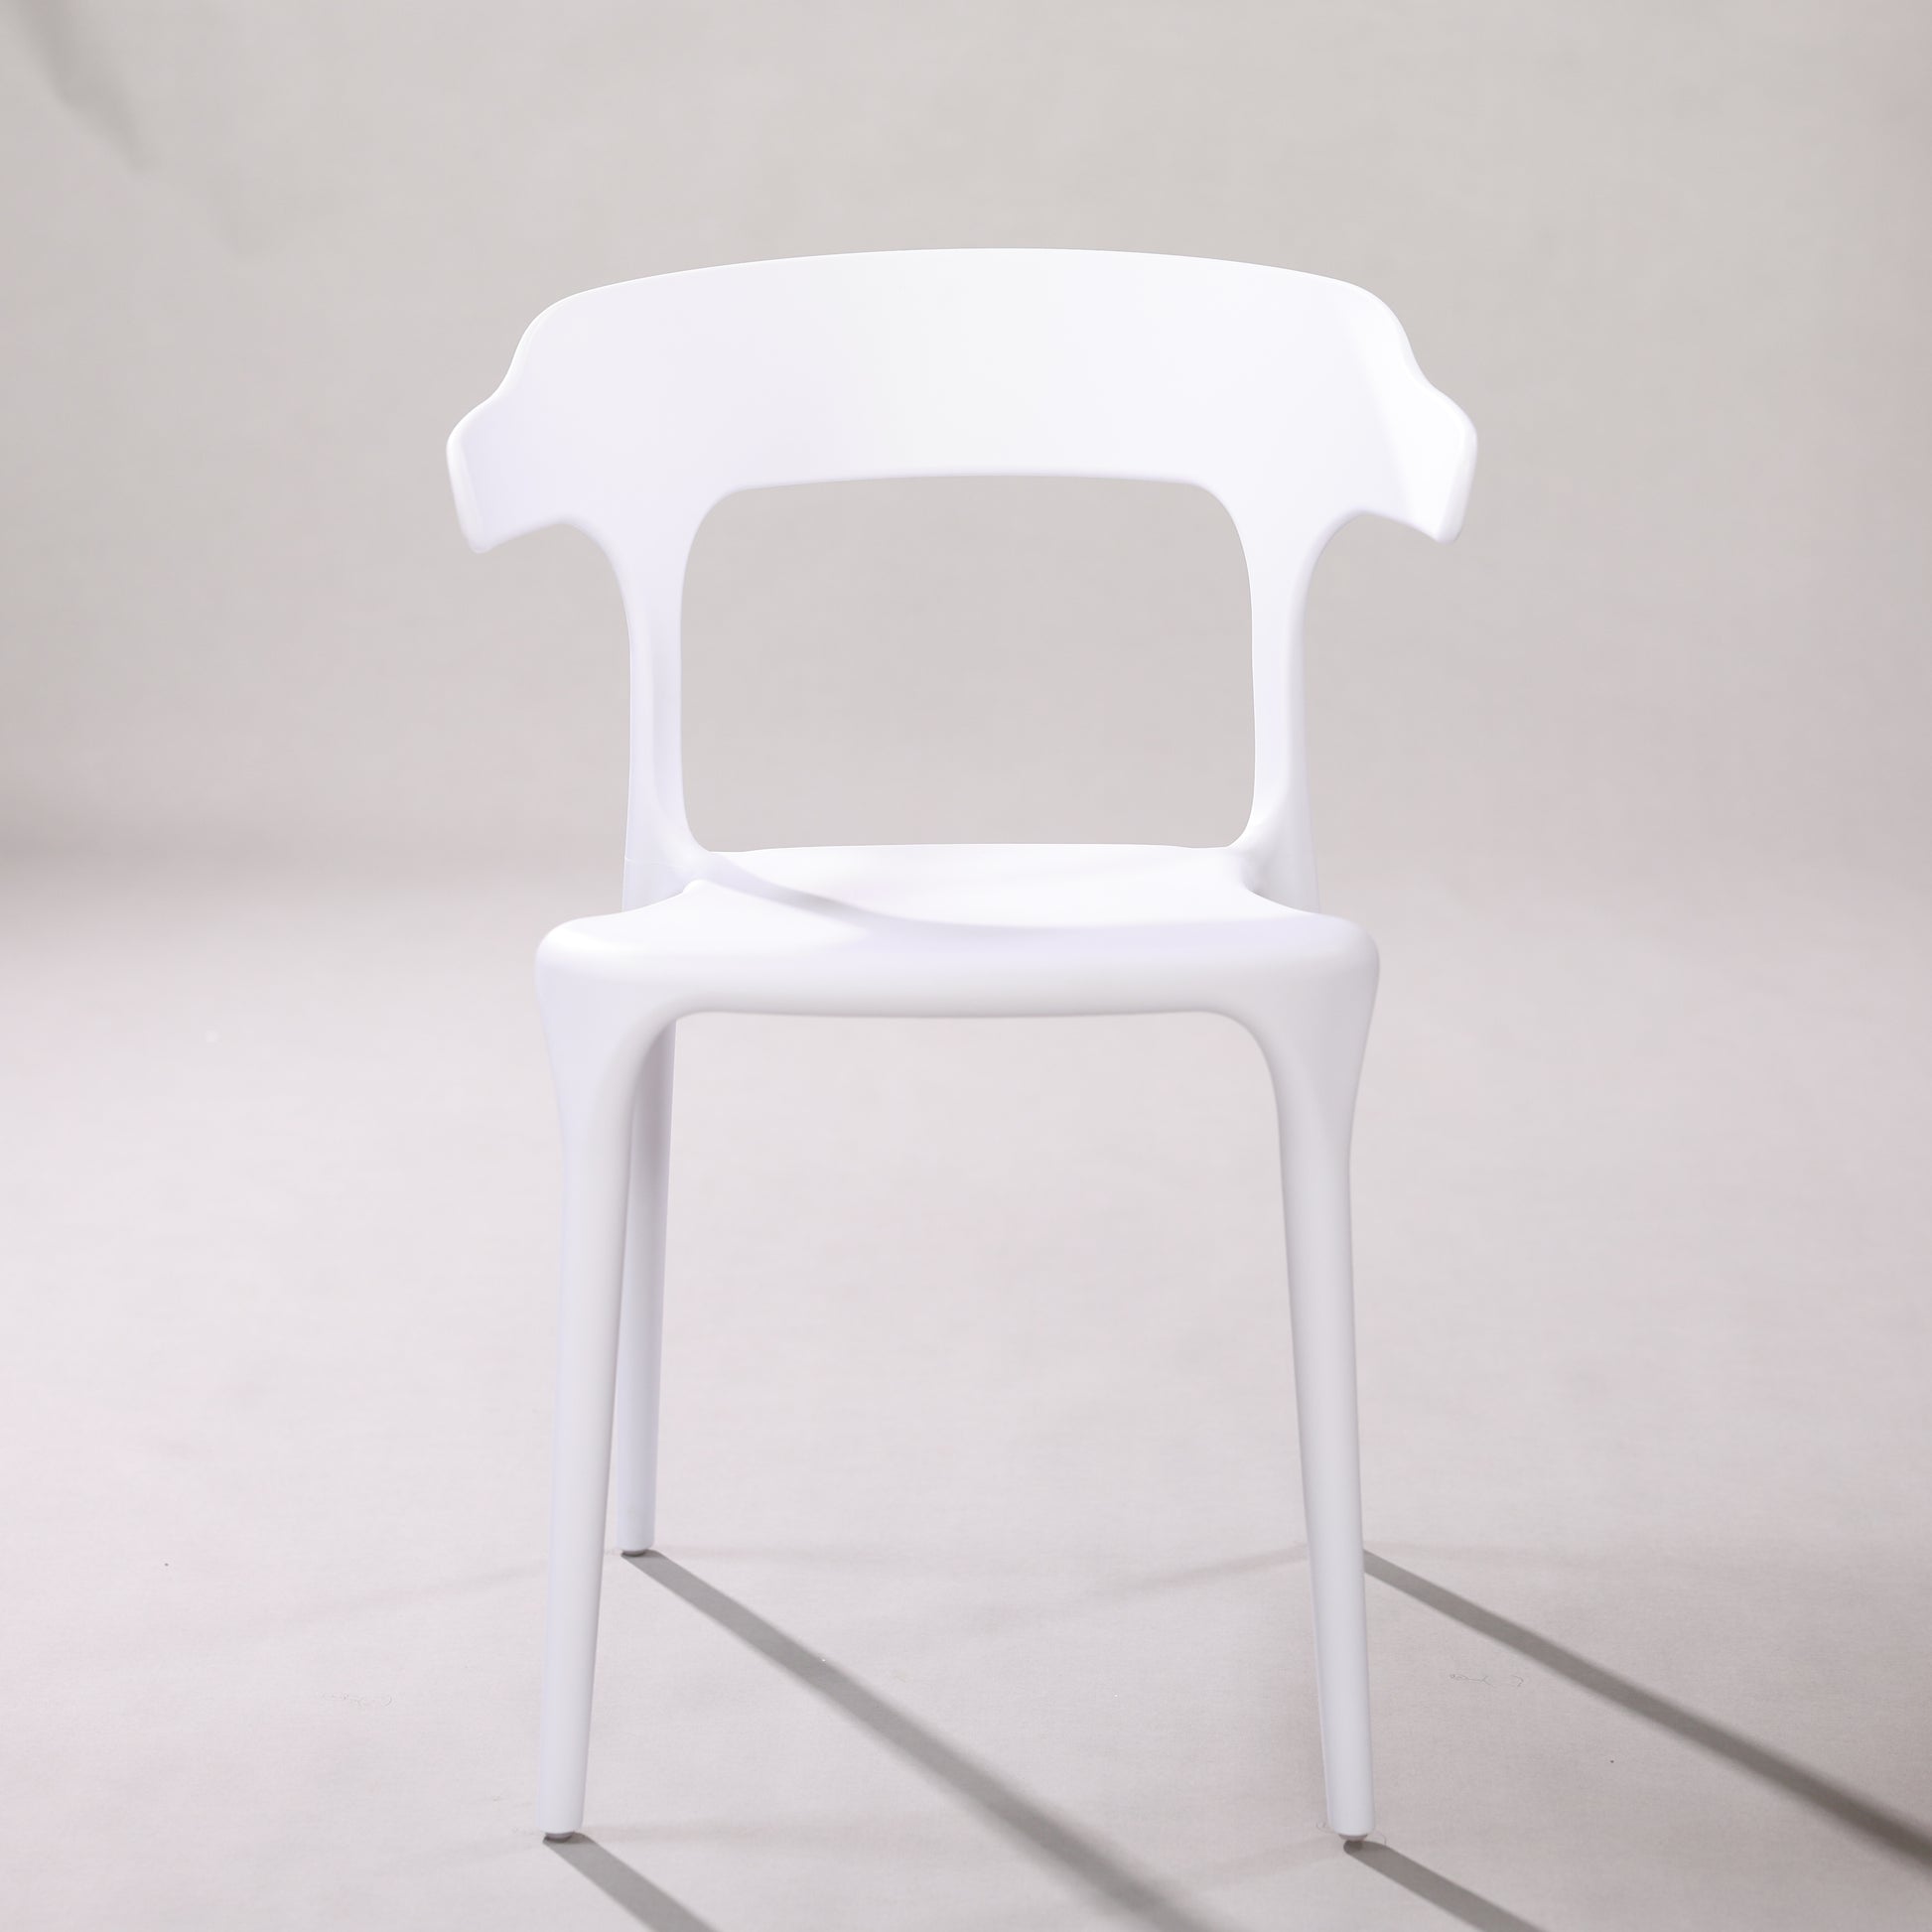 Cafeteria Chair C3001 FC